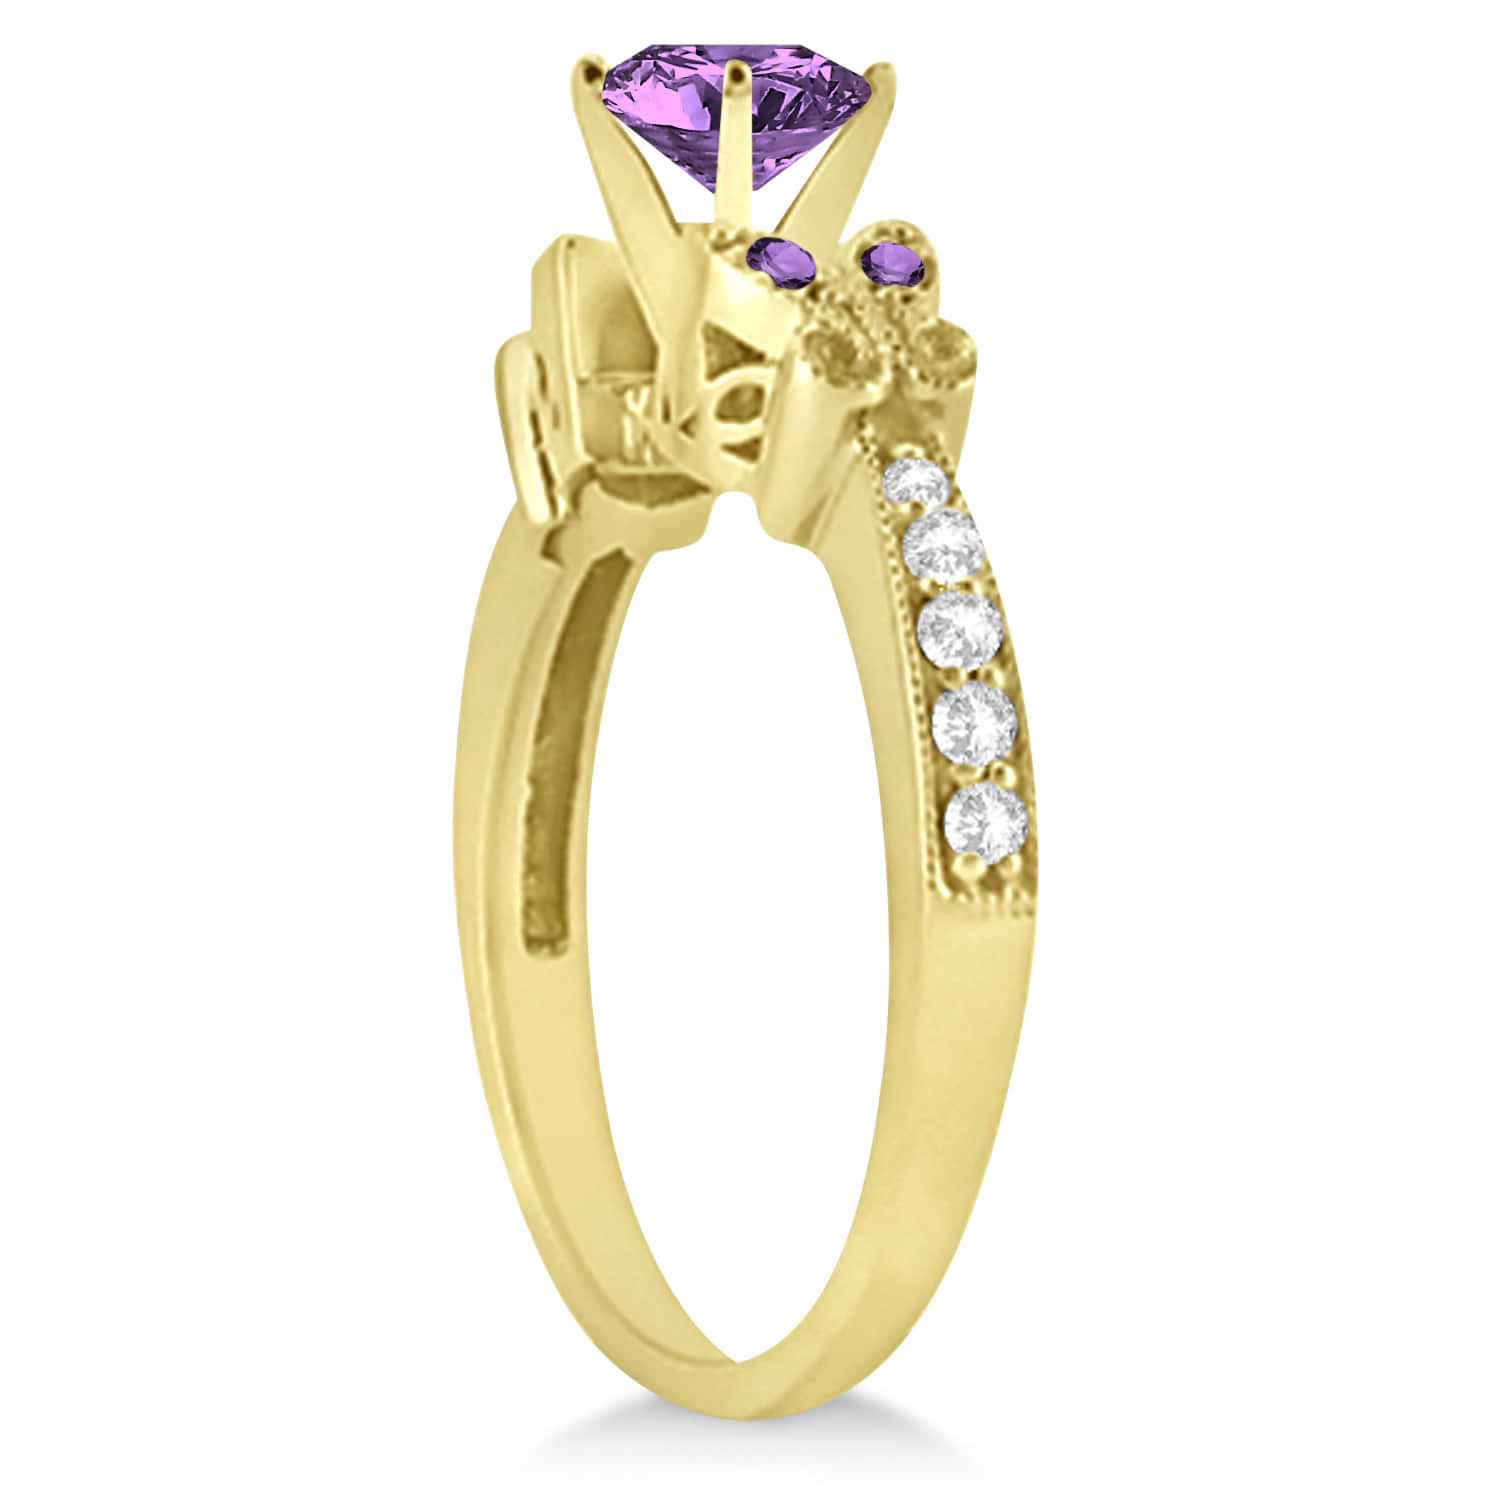 Butterfly Amethyst & Diamond Engagement Ring 14k Yellow Gold (1.53ct)